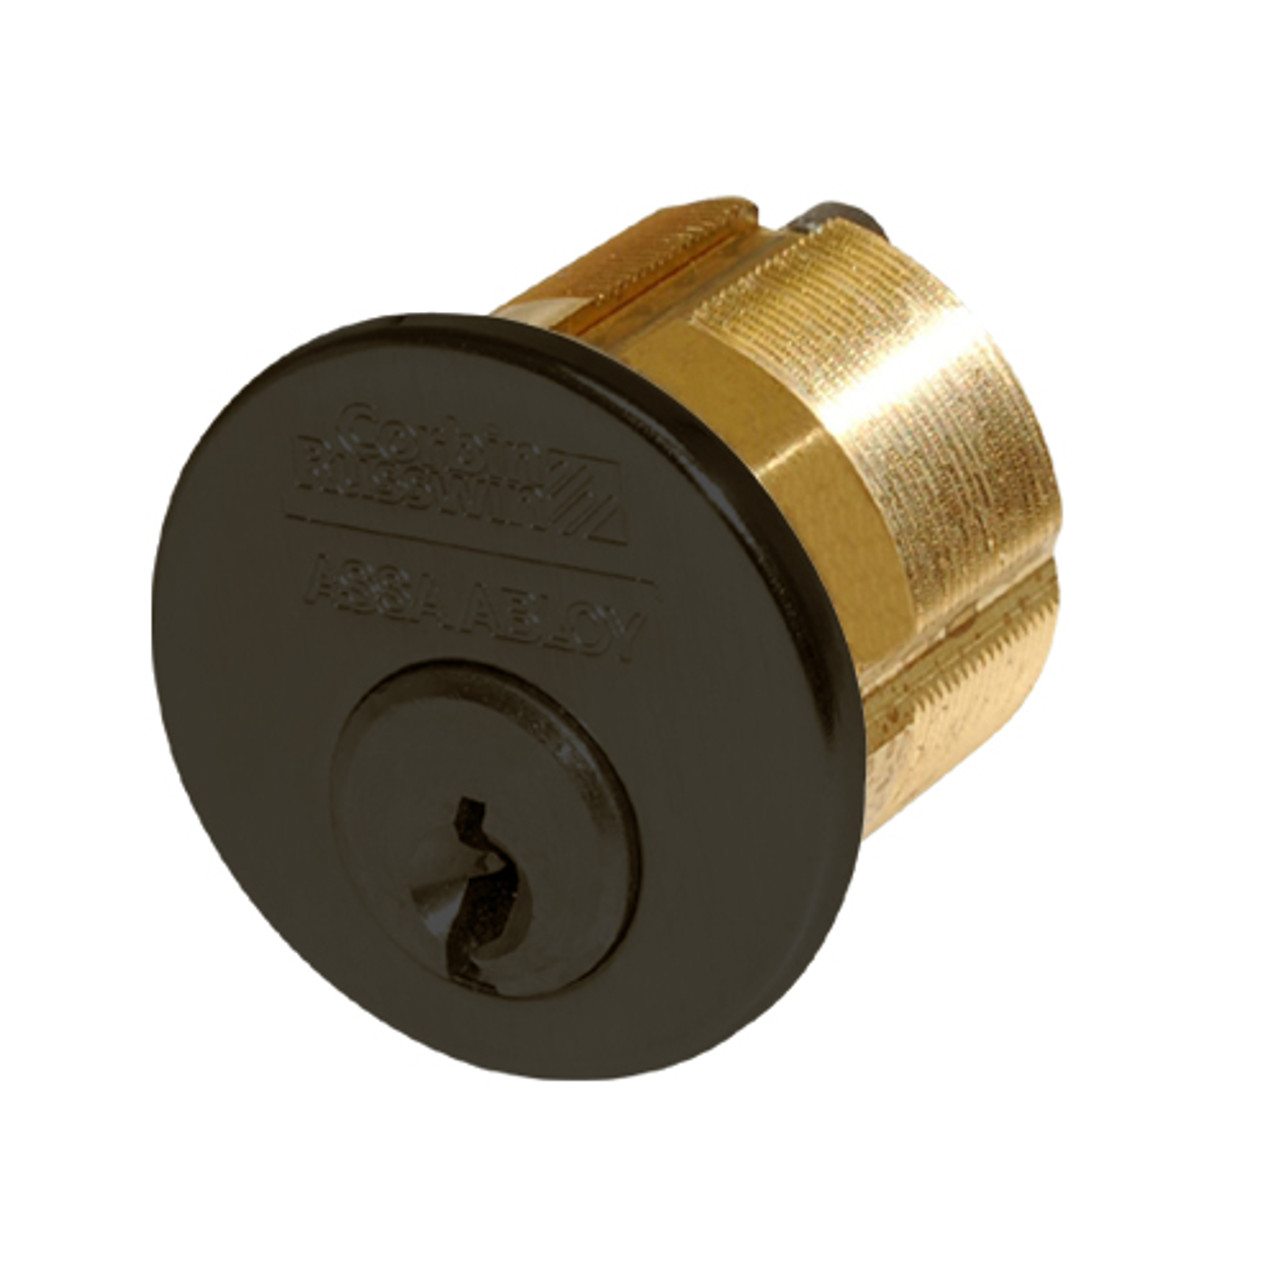 CR1000-114-A06-6-D3-613 Corbin Conventional Mortise Cylinder for Mortise Lock and DL3000 Deadlocks with Schlage L9000 Cam in Oil Rubbed Bronze Finish